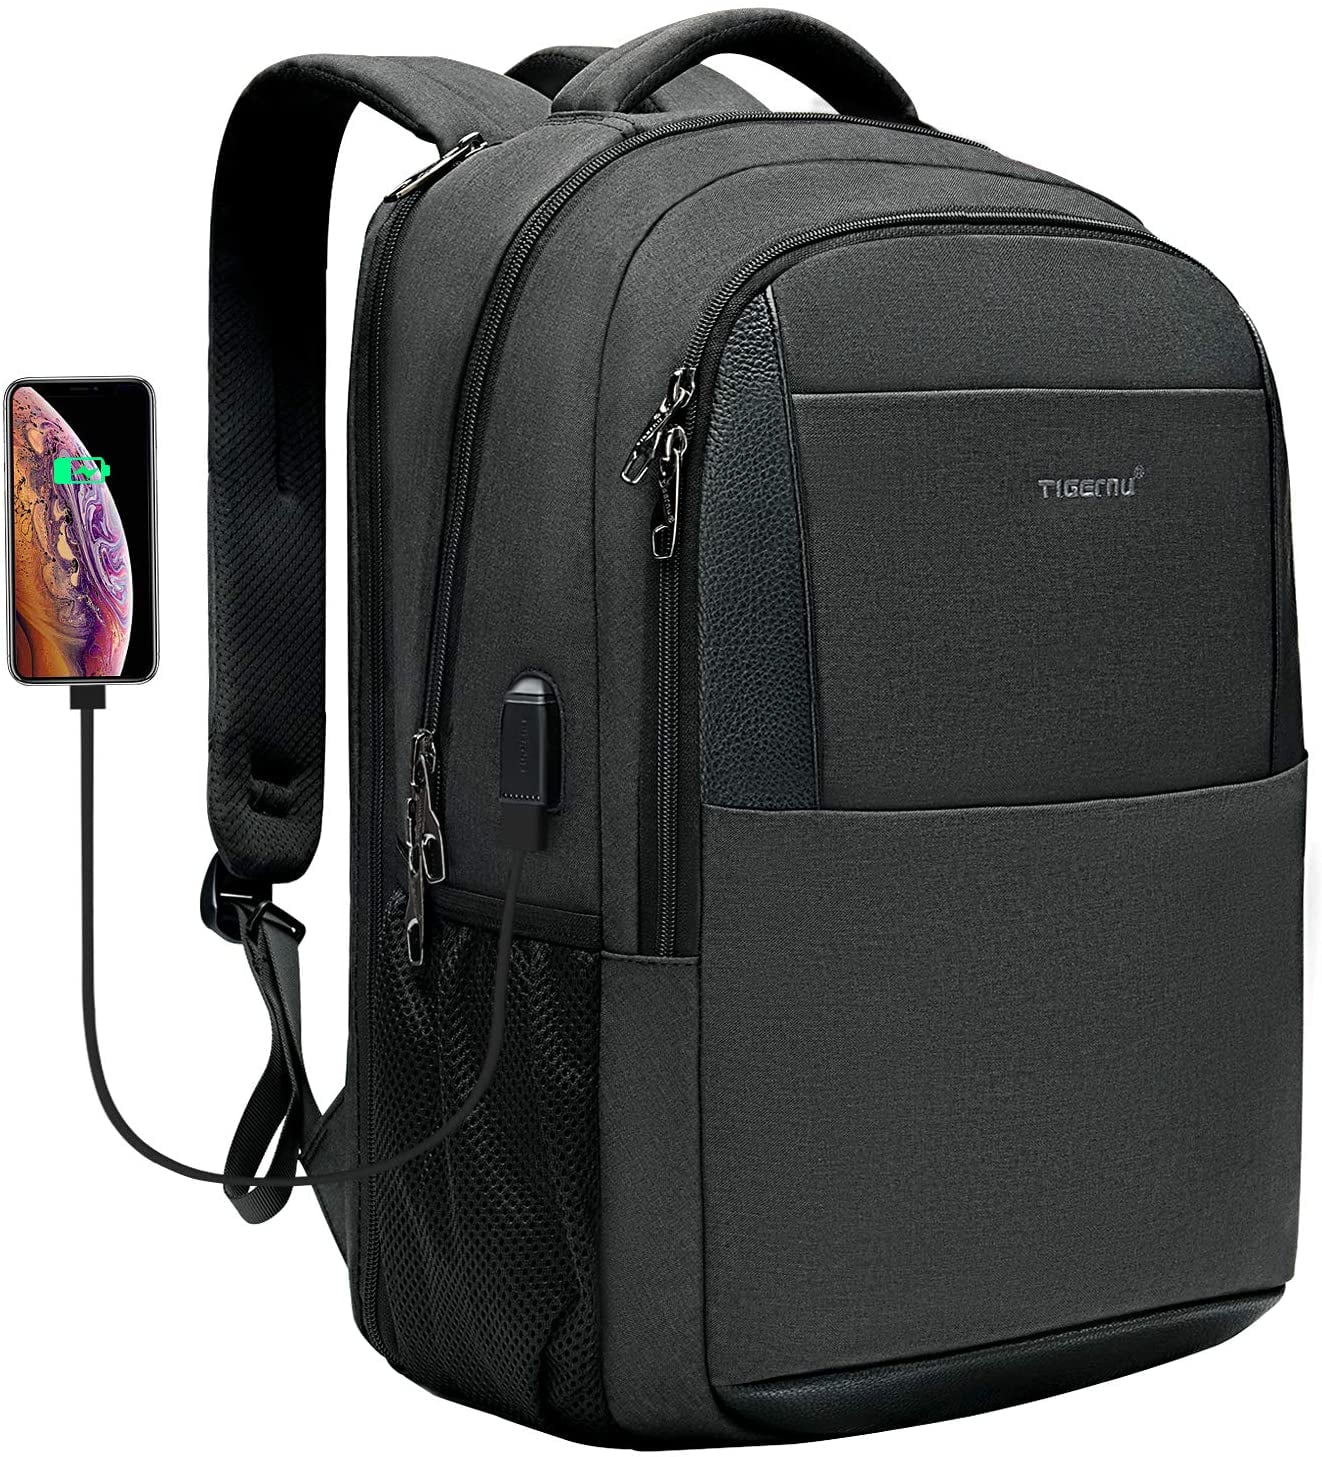 The Lightweight Backpack Bag School or Travel or Business High Quality Tigernu 